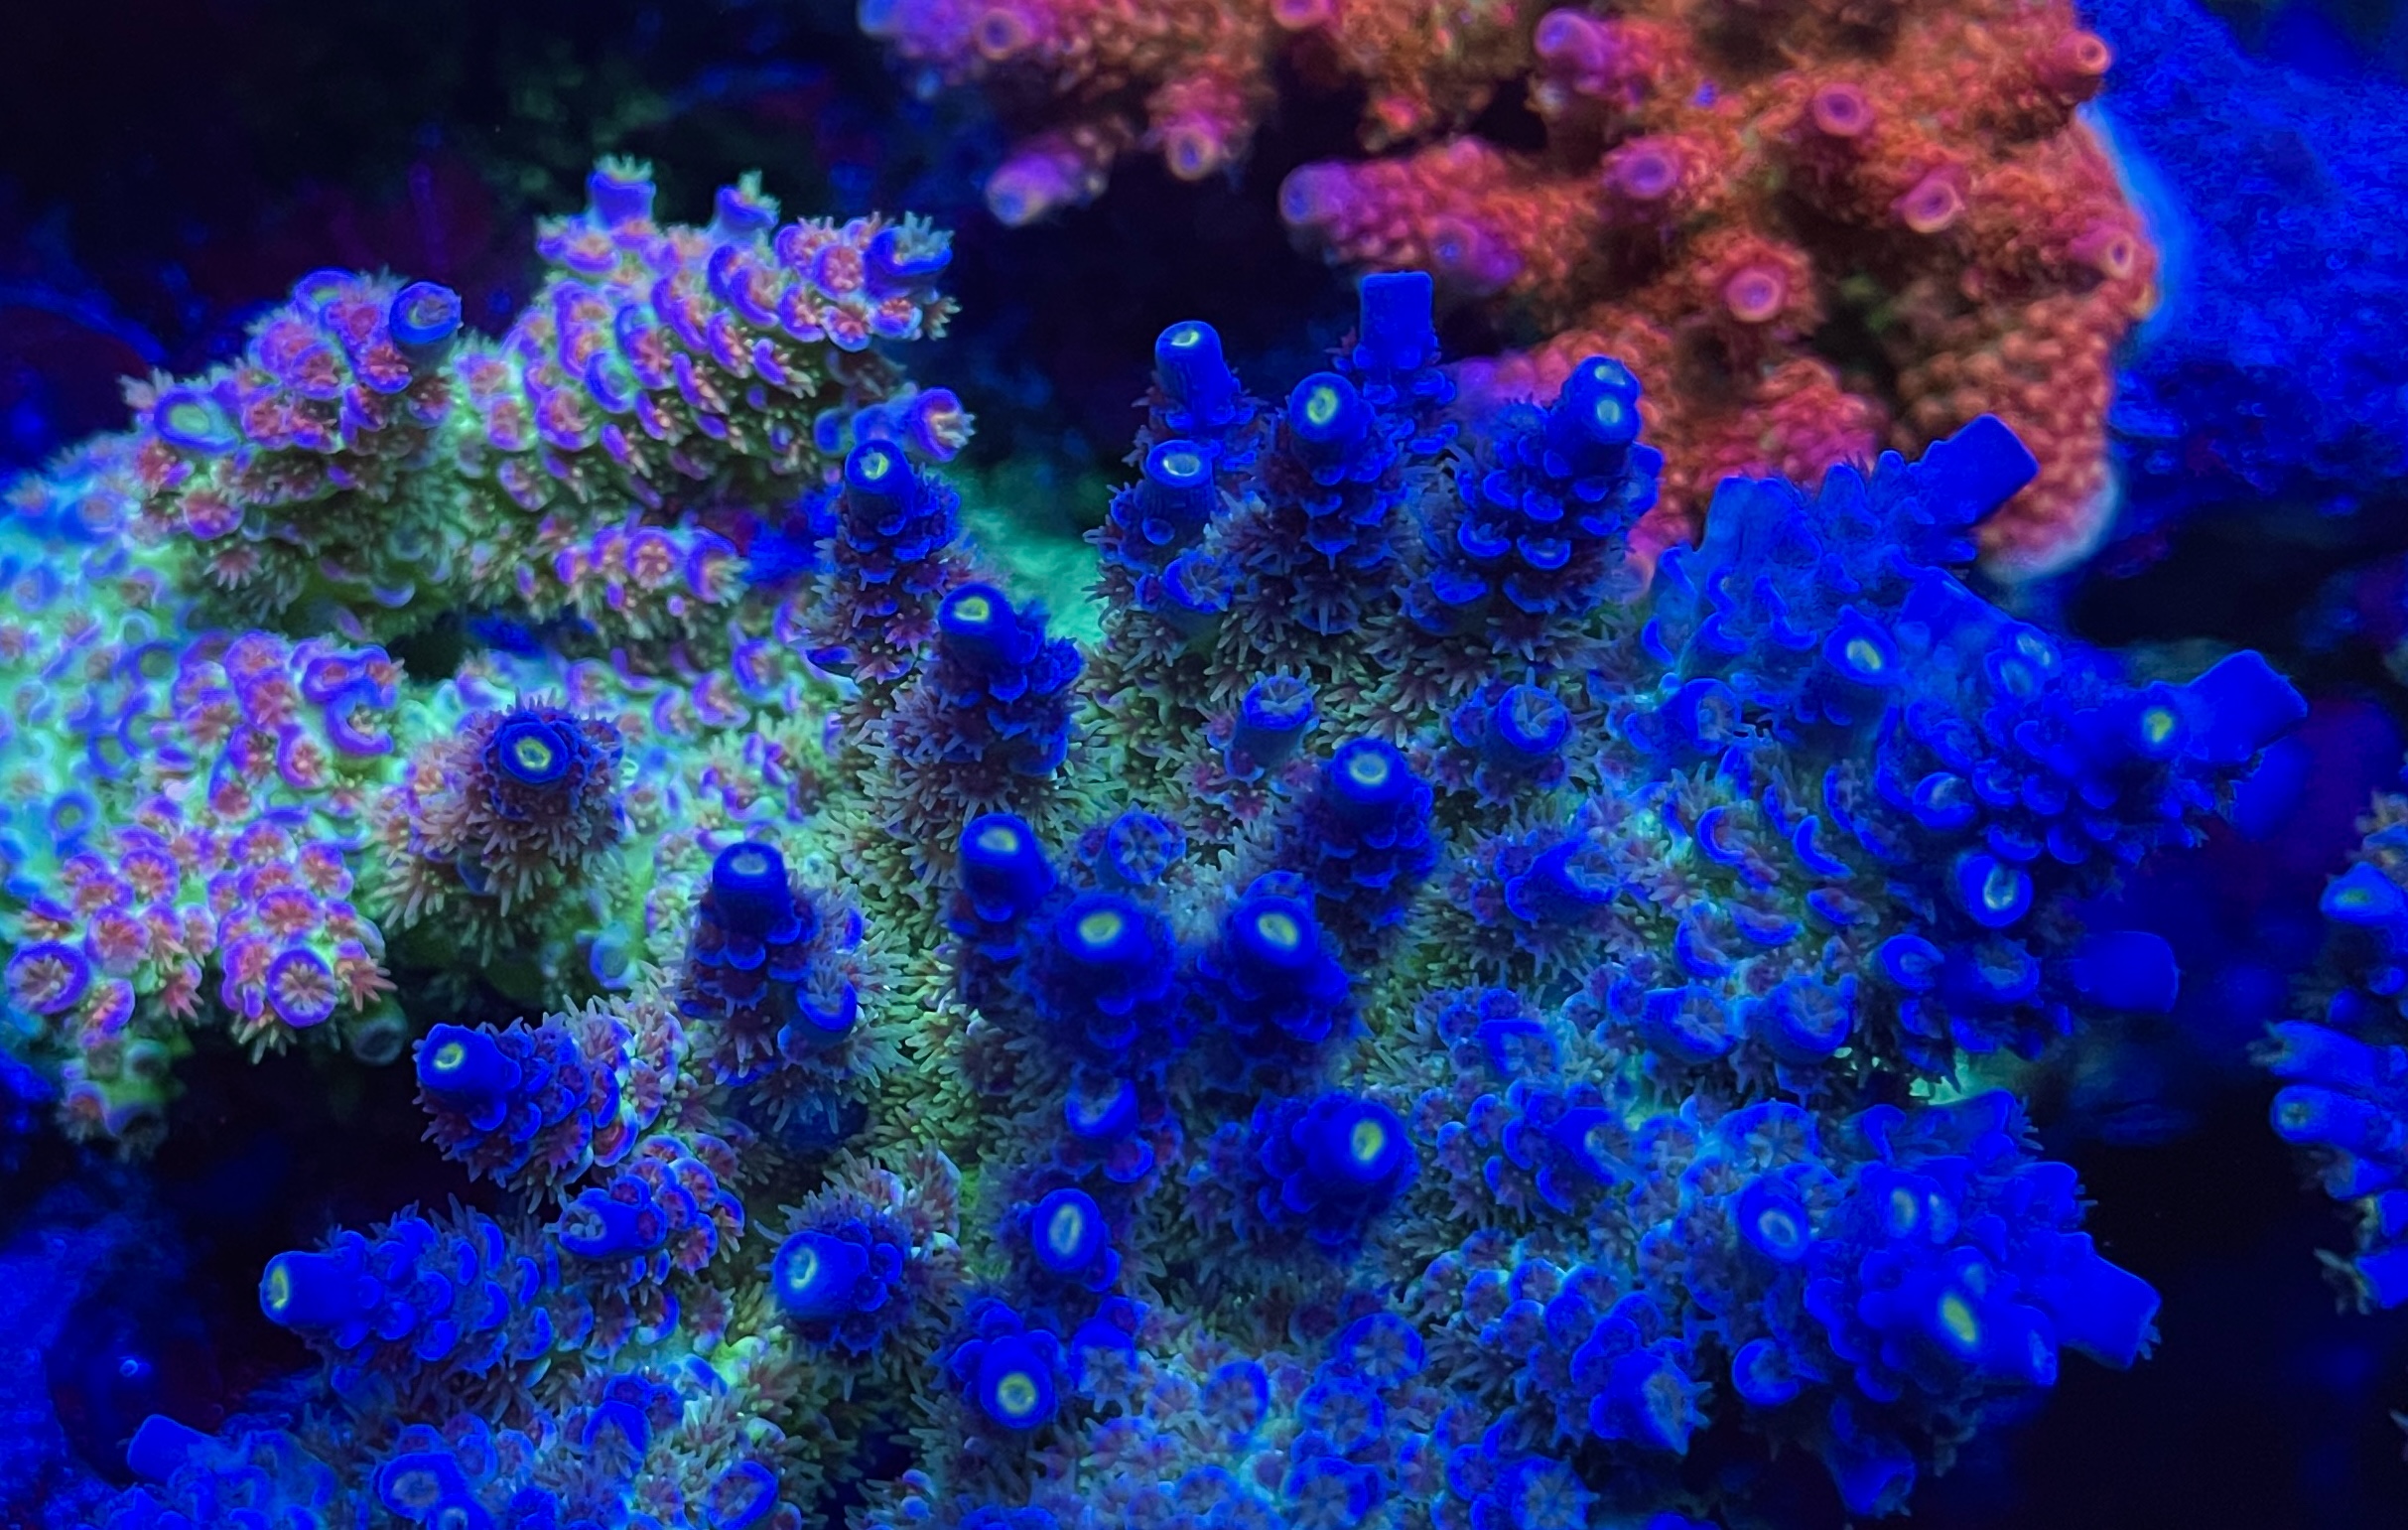 What do you need to get strong coral pop fluorescence?